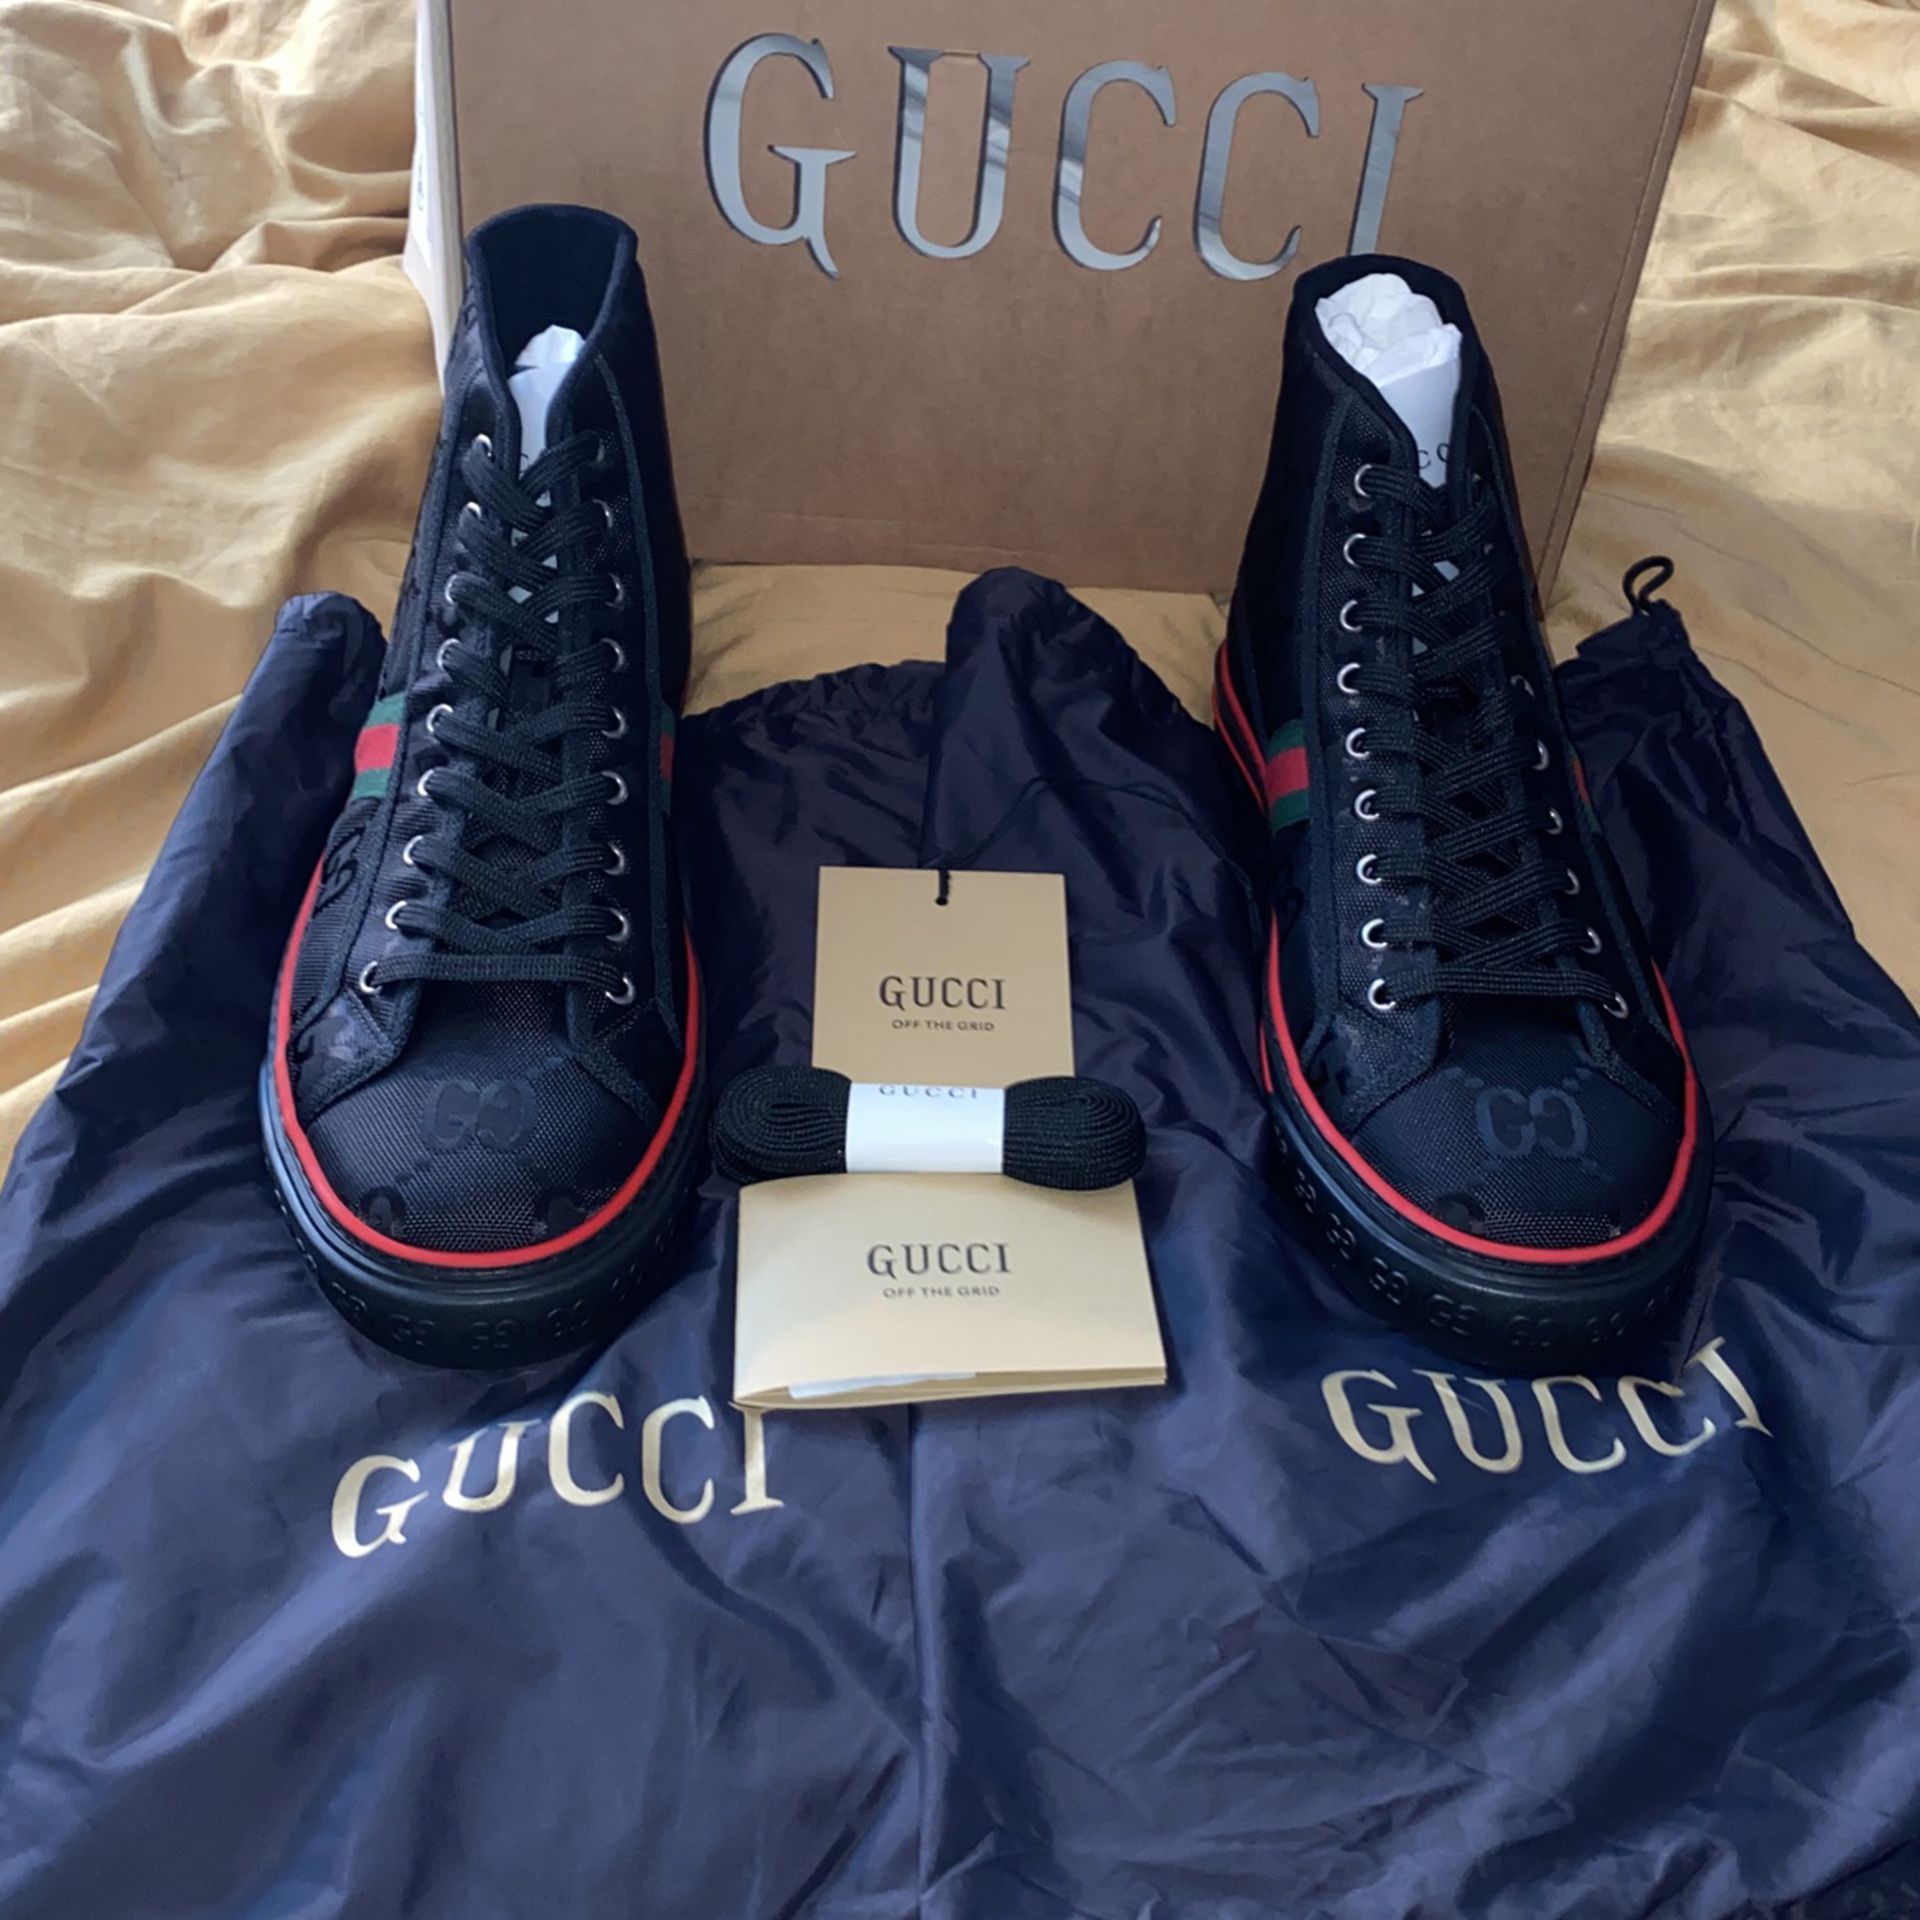 Men’s Gucci Off The Grid High Top Sneaker Size 12